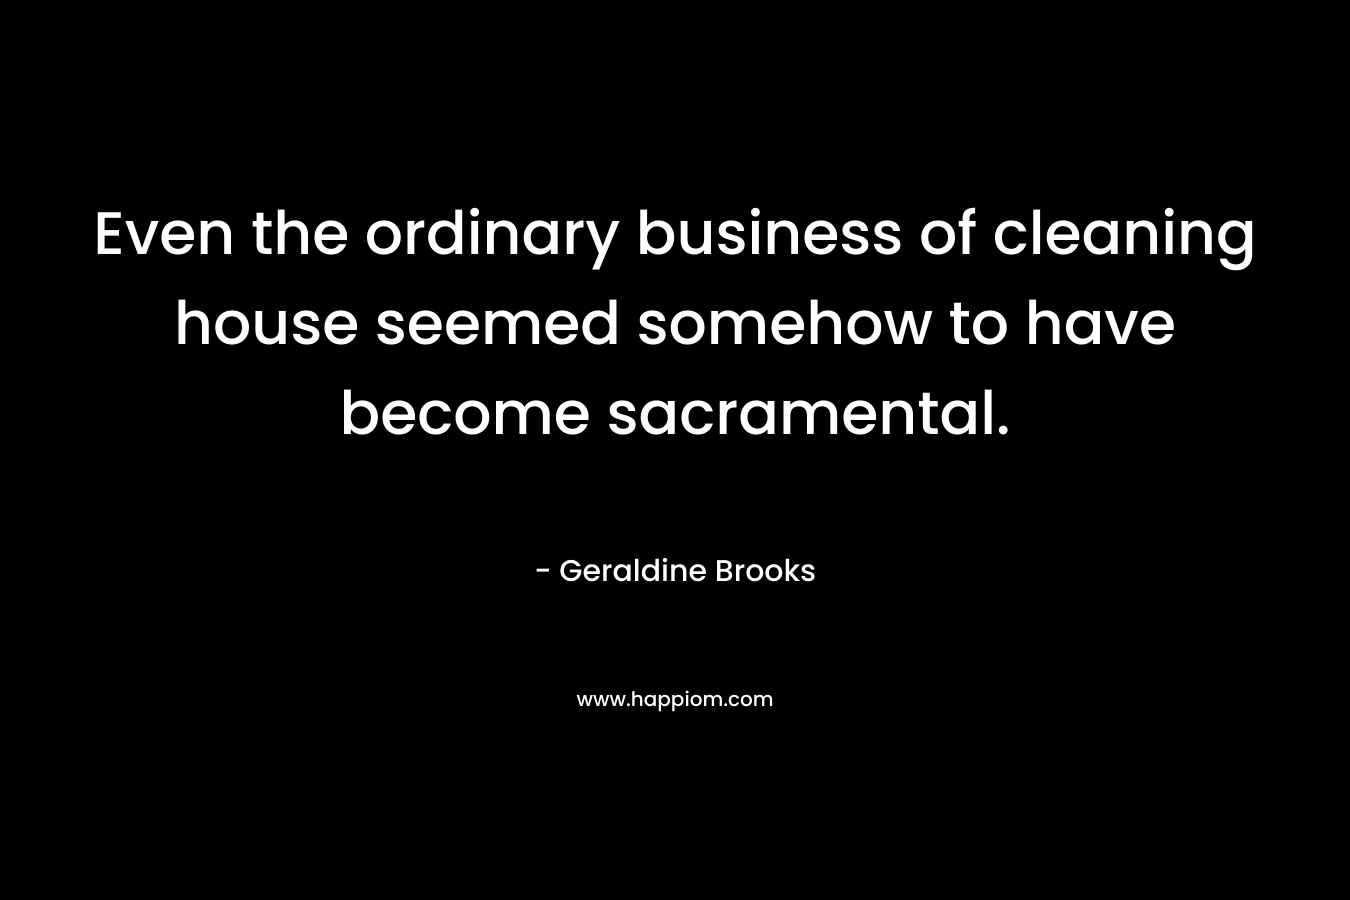 Even the ordinary business of cleaning house seemed somehow to have become sacramental. – Geraldine Brooks